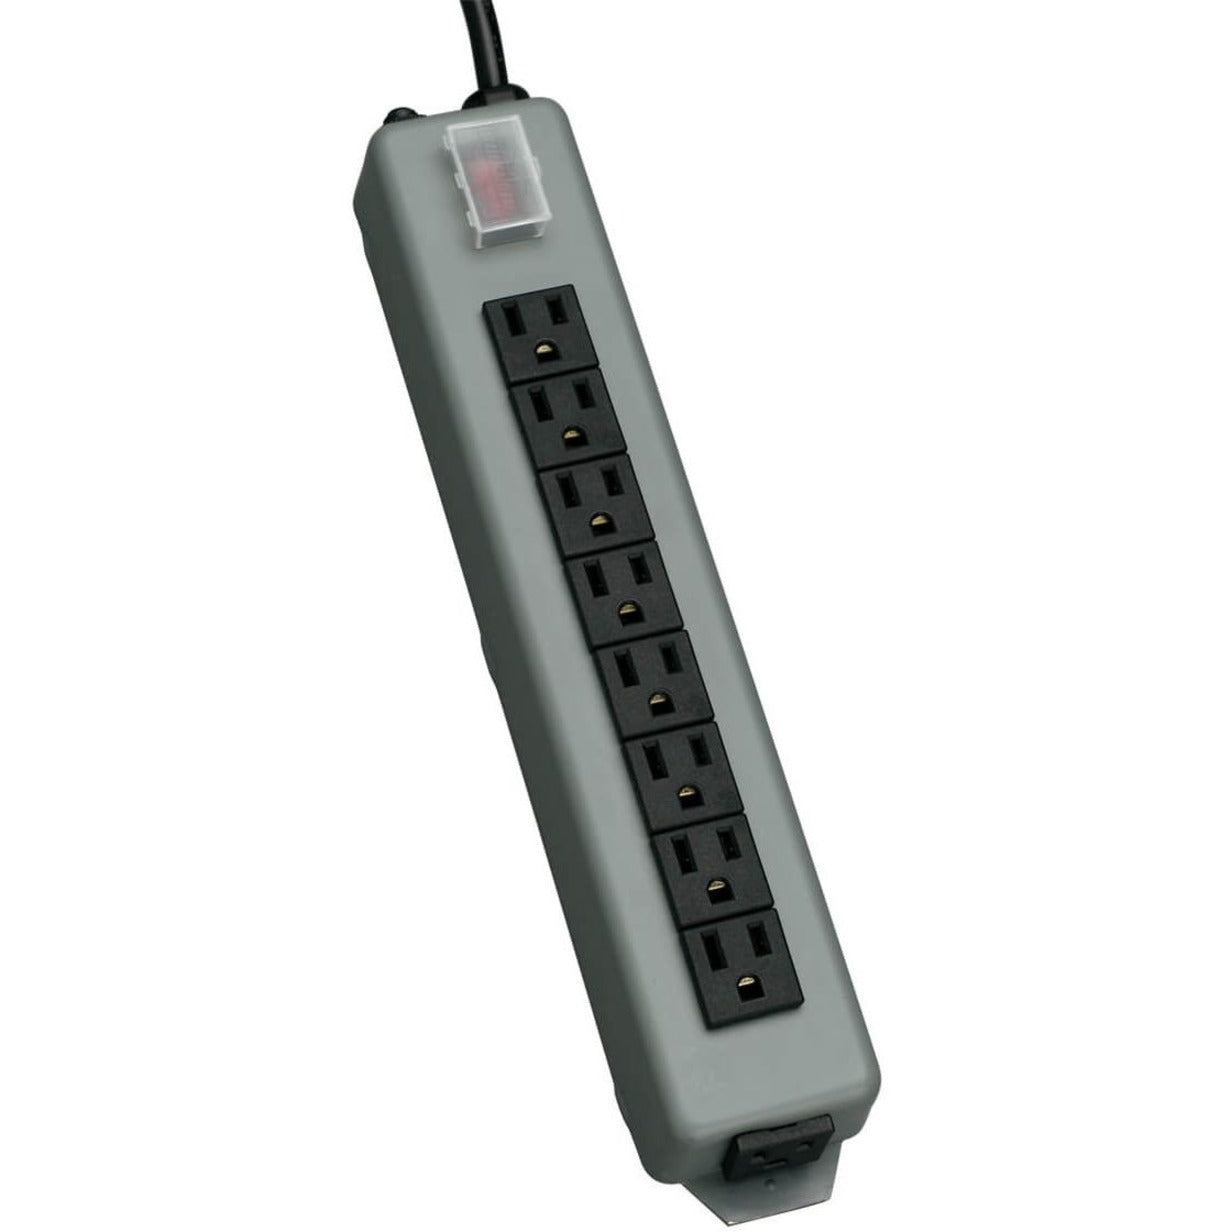 Tripp Lite UL17CB-15 Waber 9 Outlets Power Strip, 15 Amp, 15 ft Cord, Wall Mountable